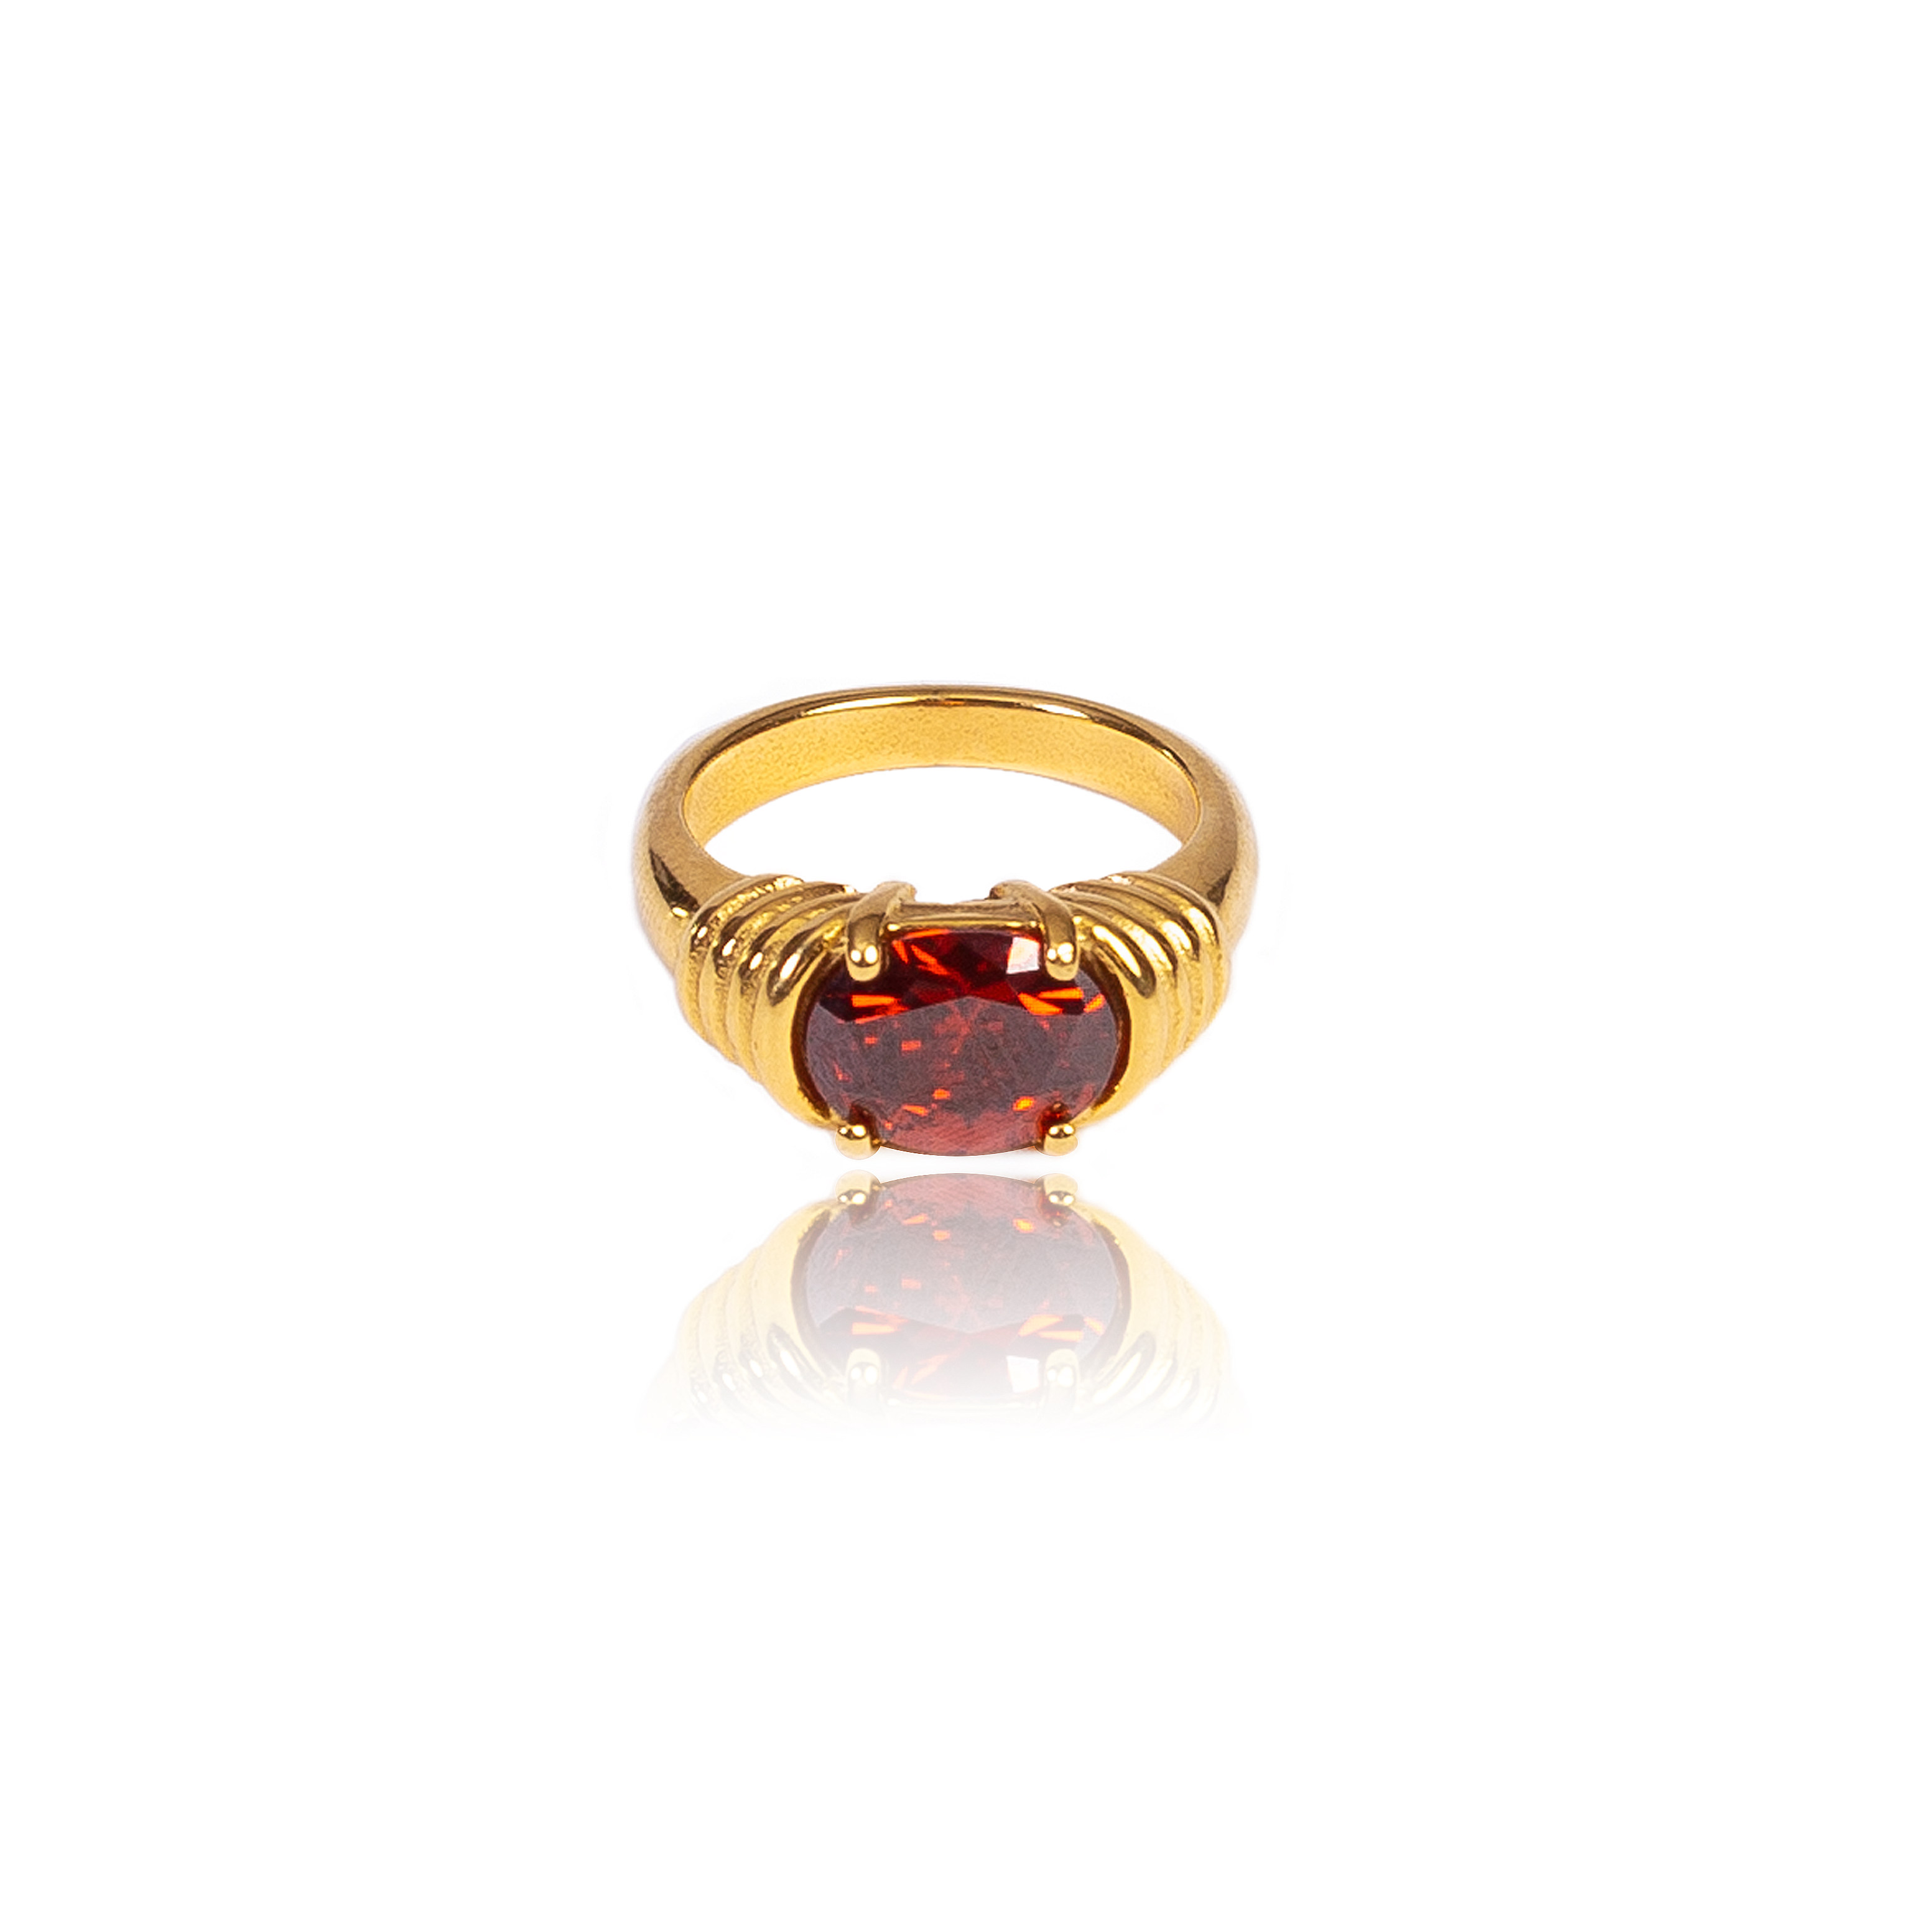 Tseatjewelry Women's Ease Ring - Red In Burgundy